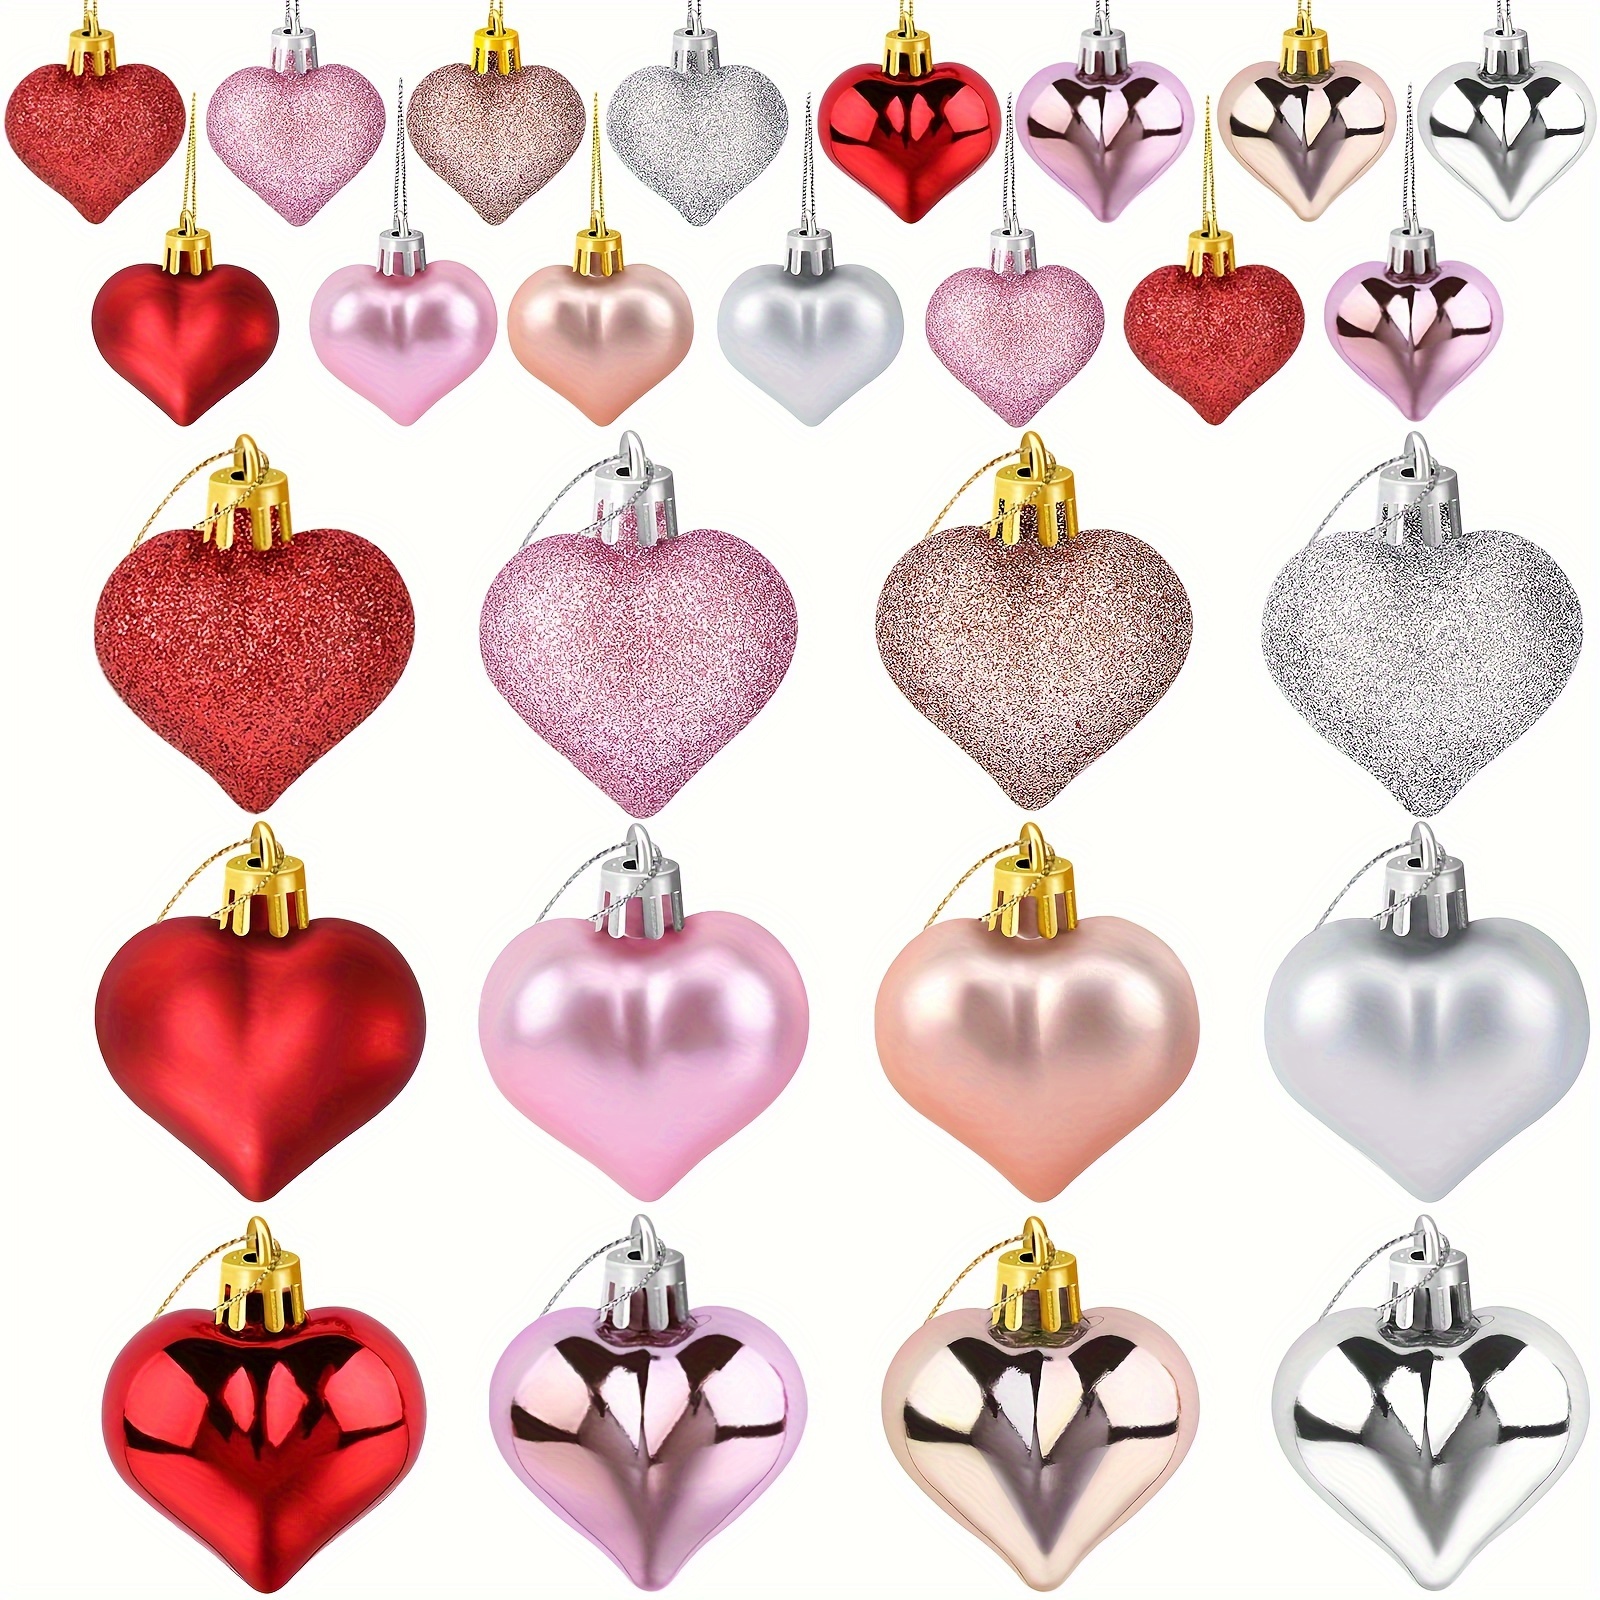 36Pcs Valentine's Day Heart Shaped Ornaments with 2 Sizes - Valentines  Heart Decorations - Red Pink Silver White Heart Shaped Baubles for Home  Tree 